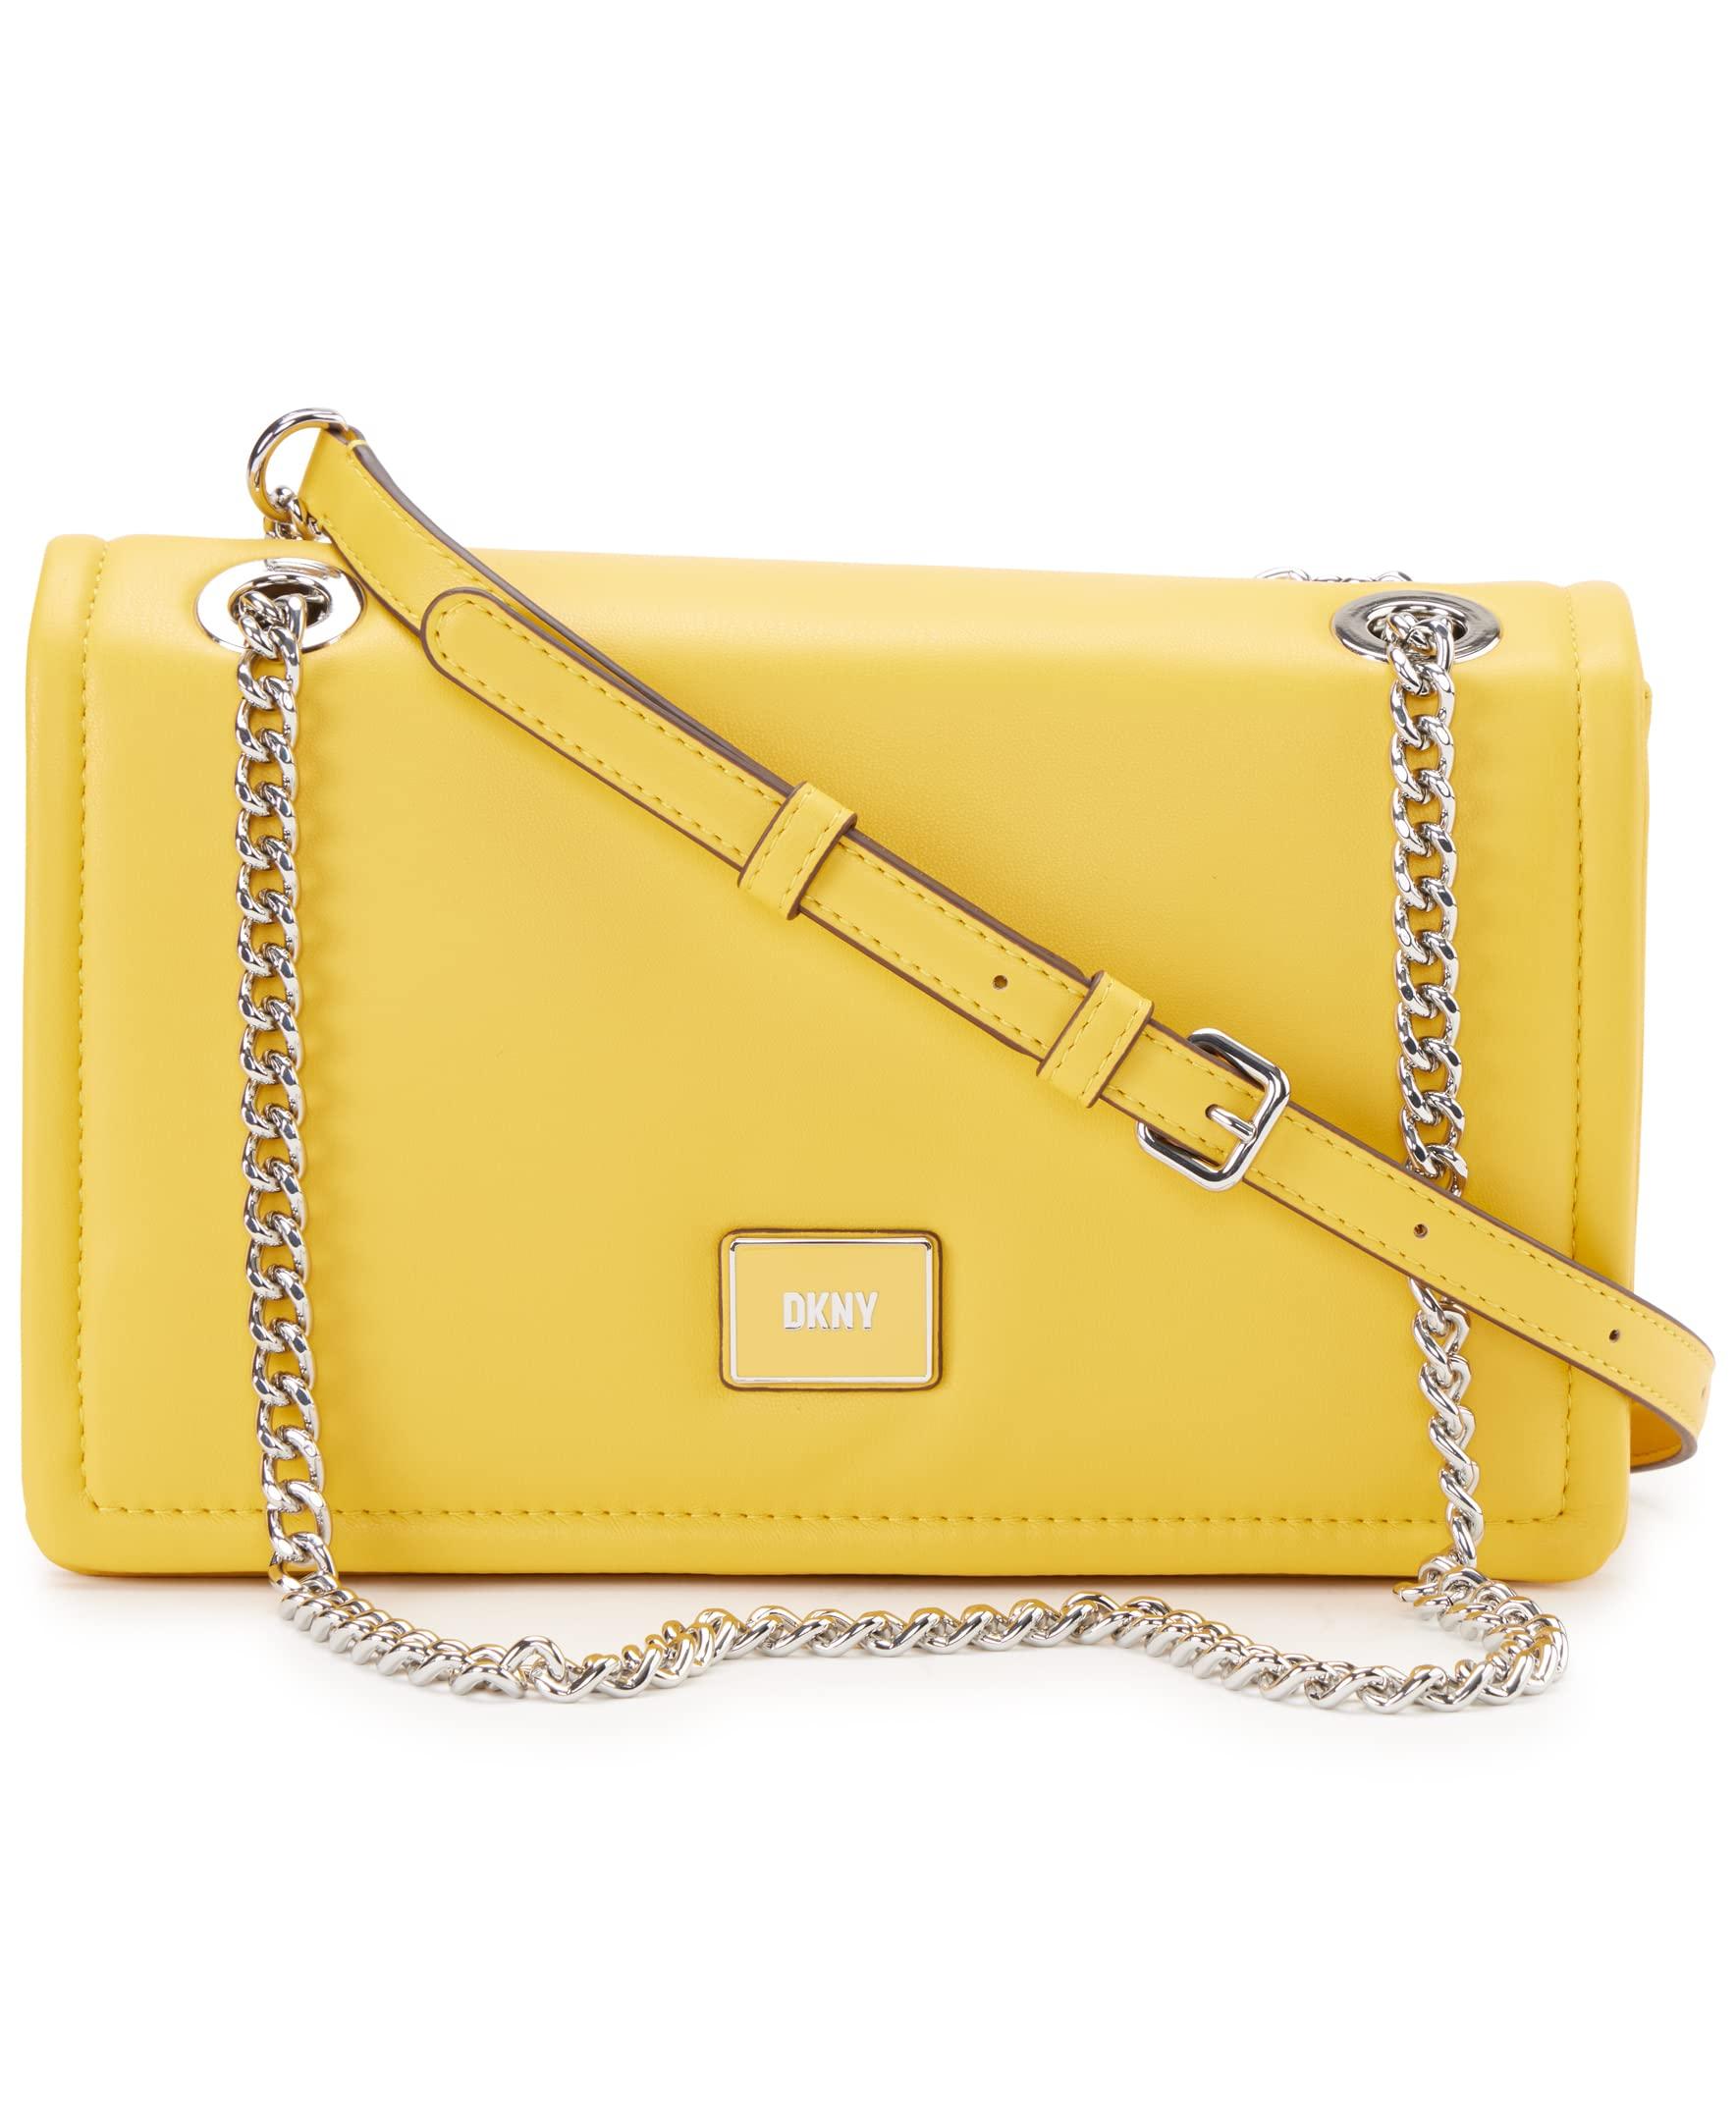 DKNY Magnolia Shoulder Bag With Chain Strap in Yellow | Lyst